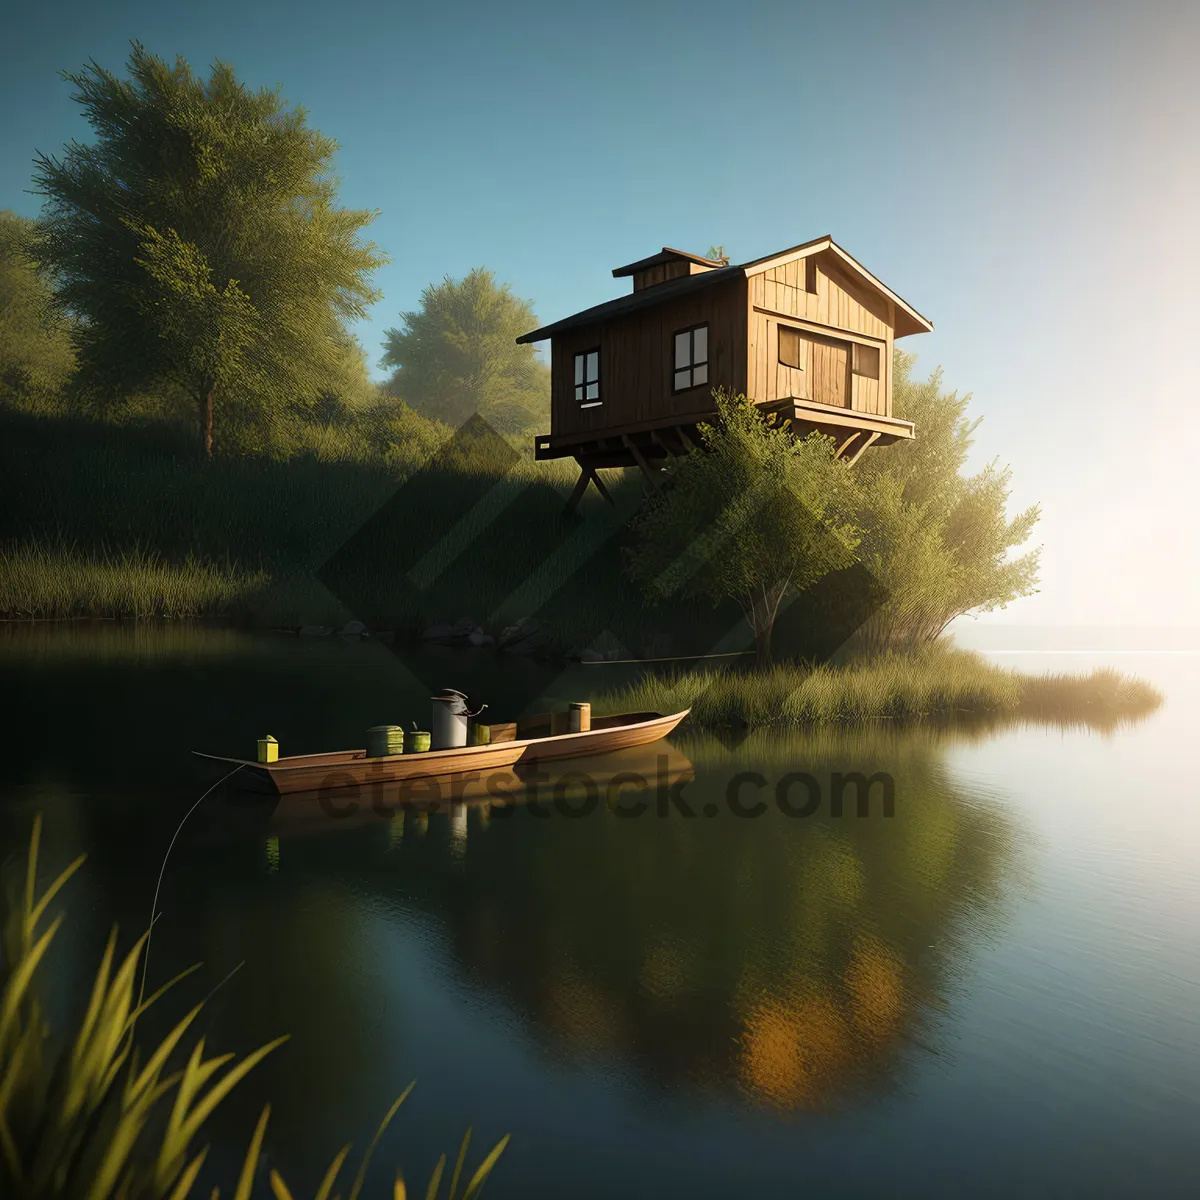 Picture of Idyllic Waterside Retreat: Serene Outbuilding amidst Lake Reflection